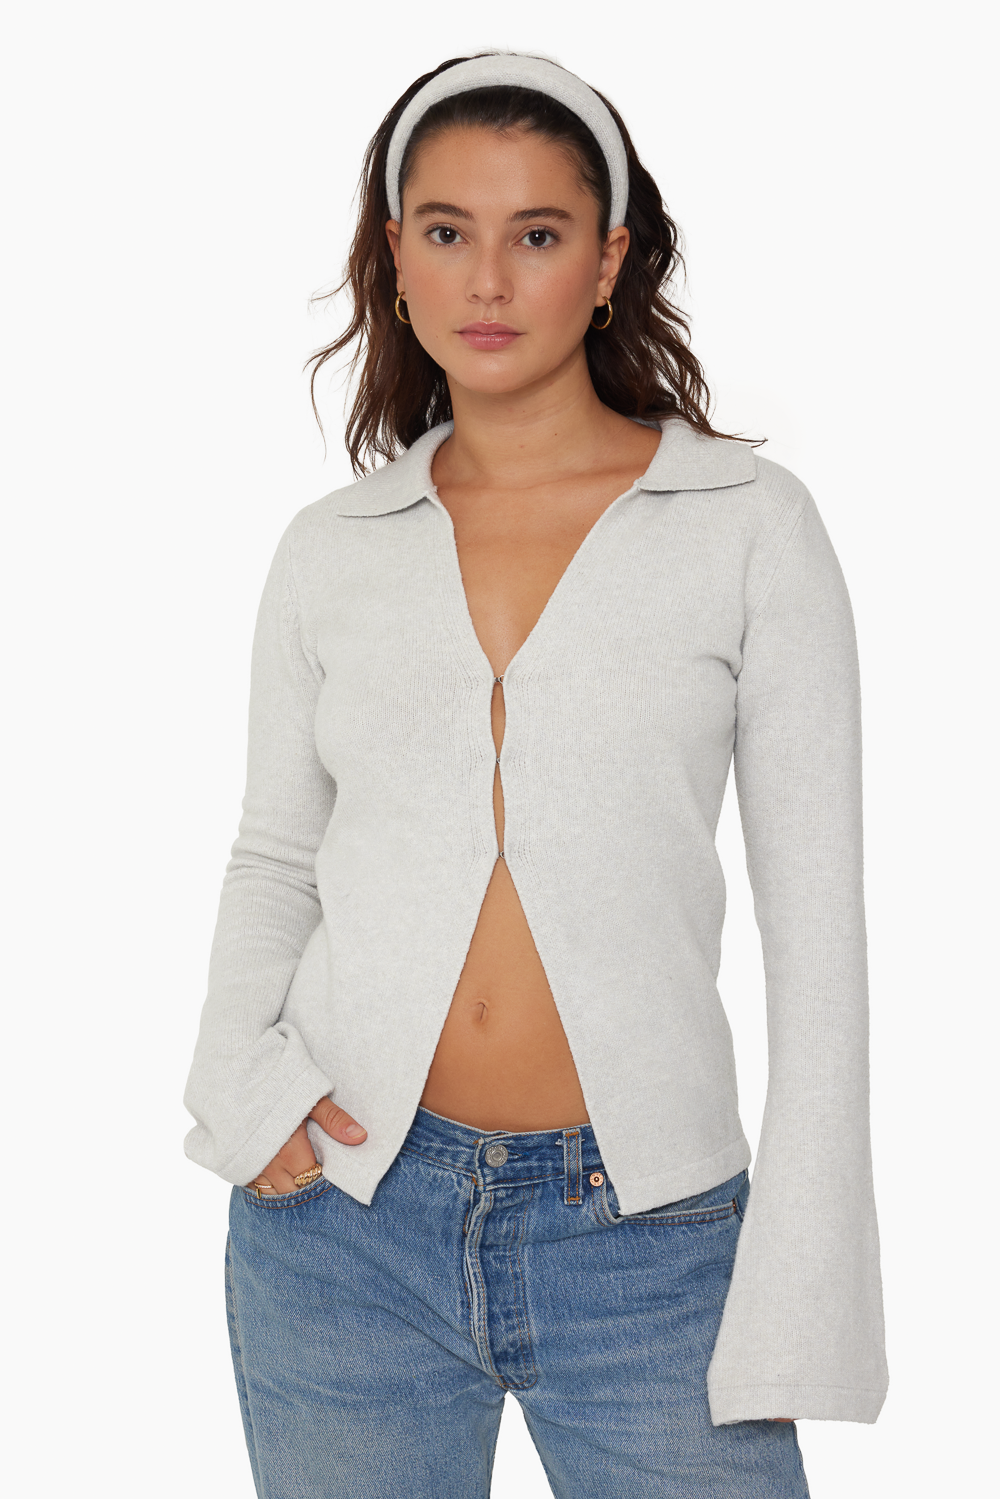 JERSEY KNIT DOUBLE V CARDIGAN - FOG Featured Image